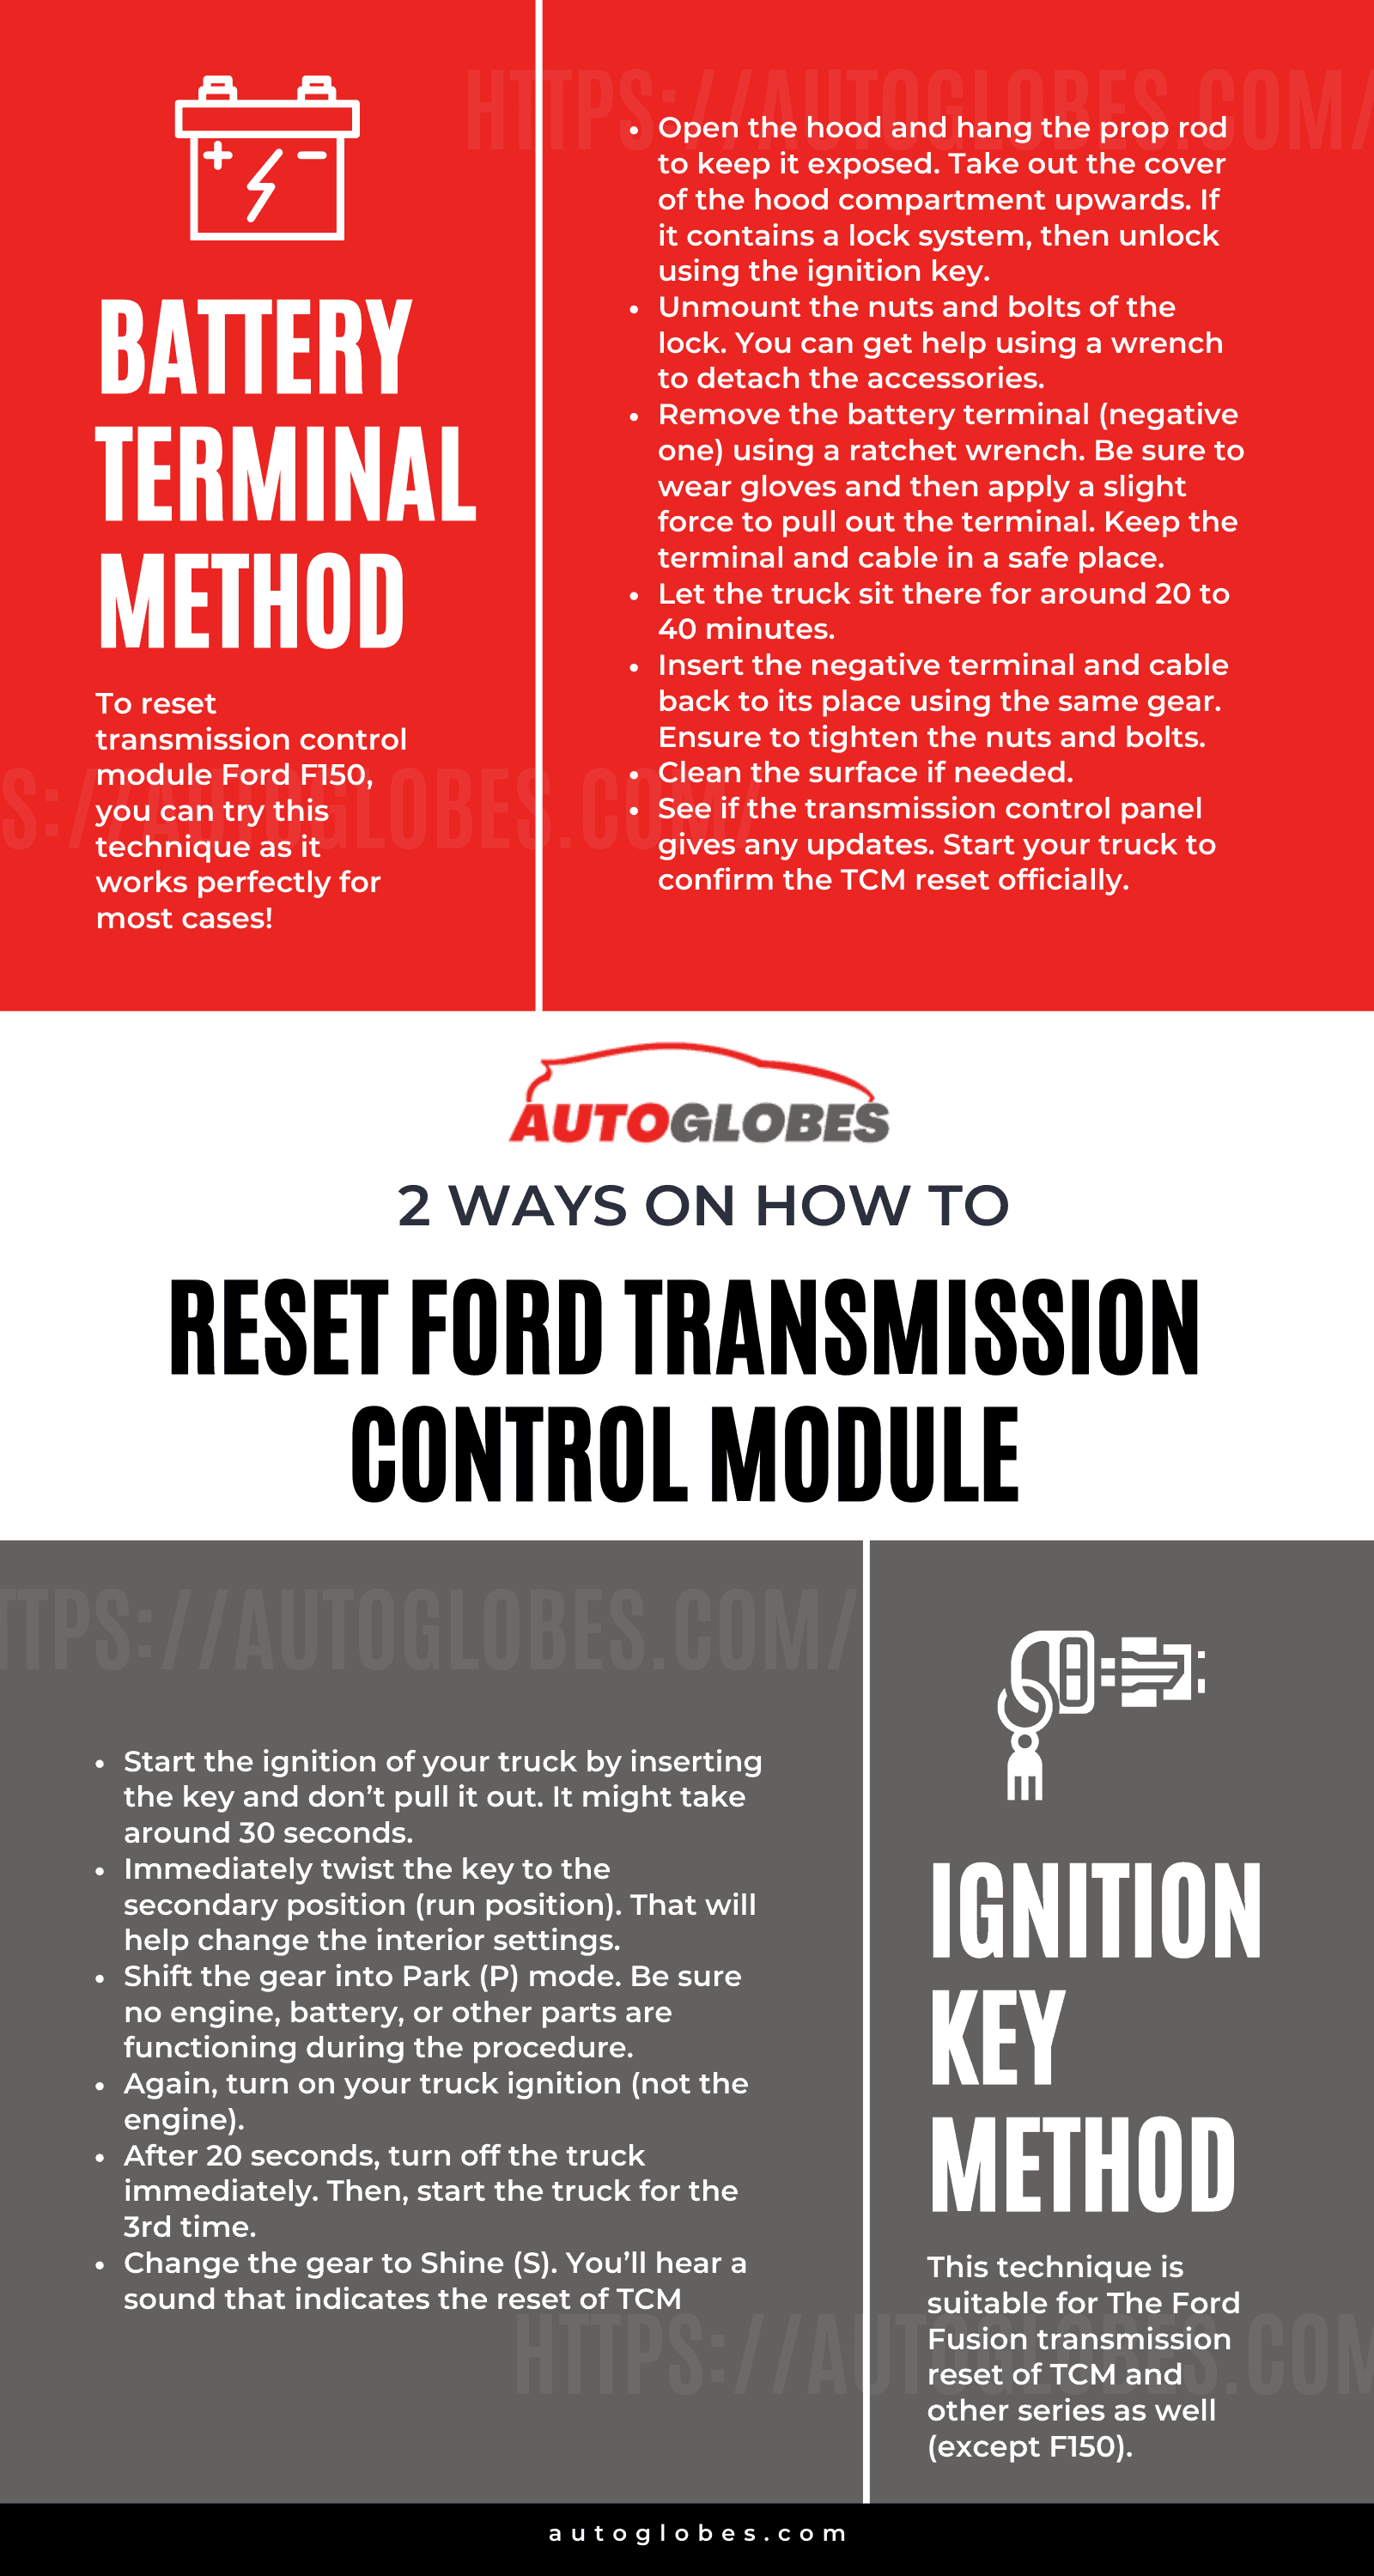 Best Way to Reset Ford Transmission Control Module